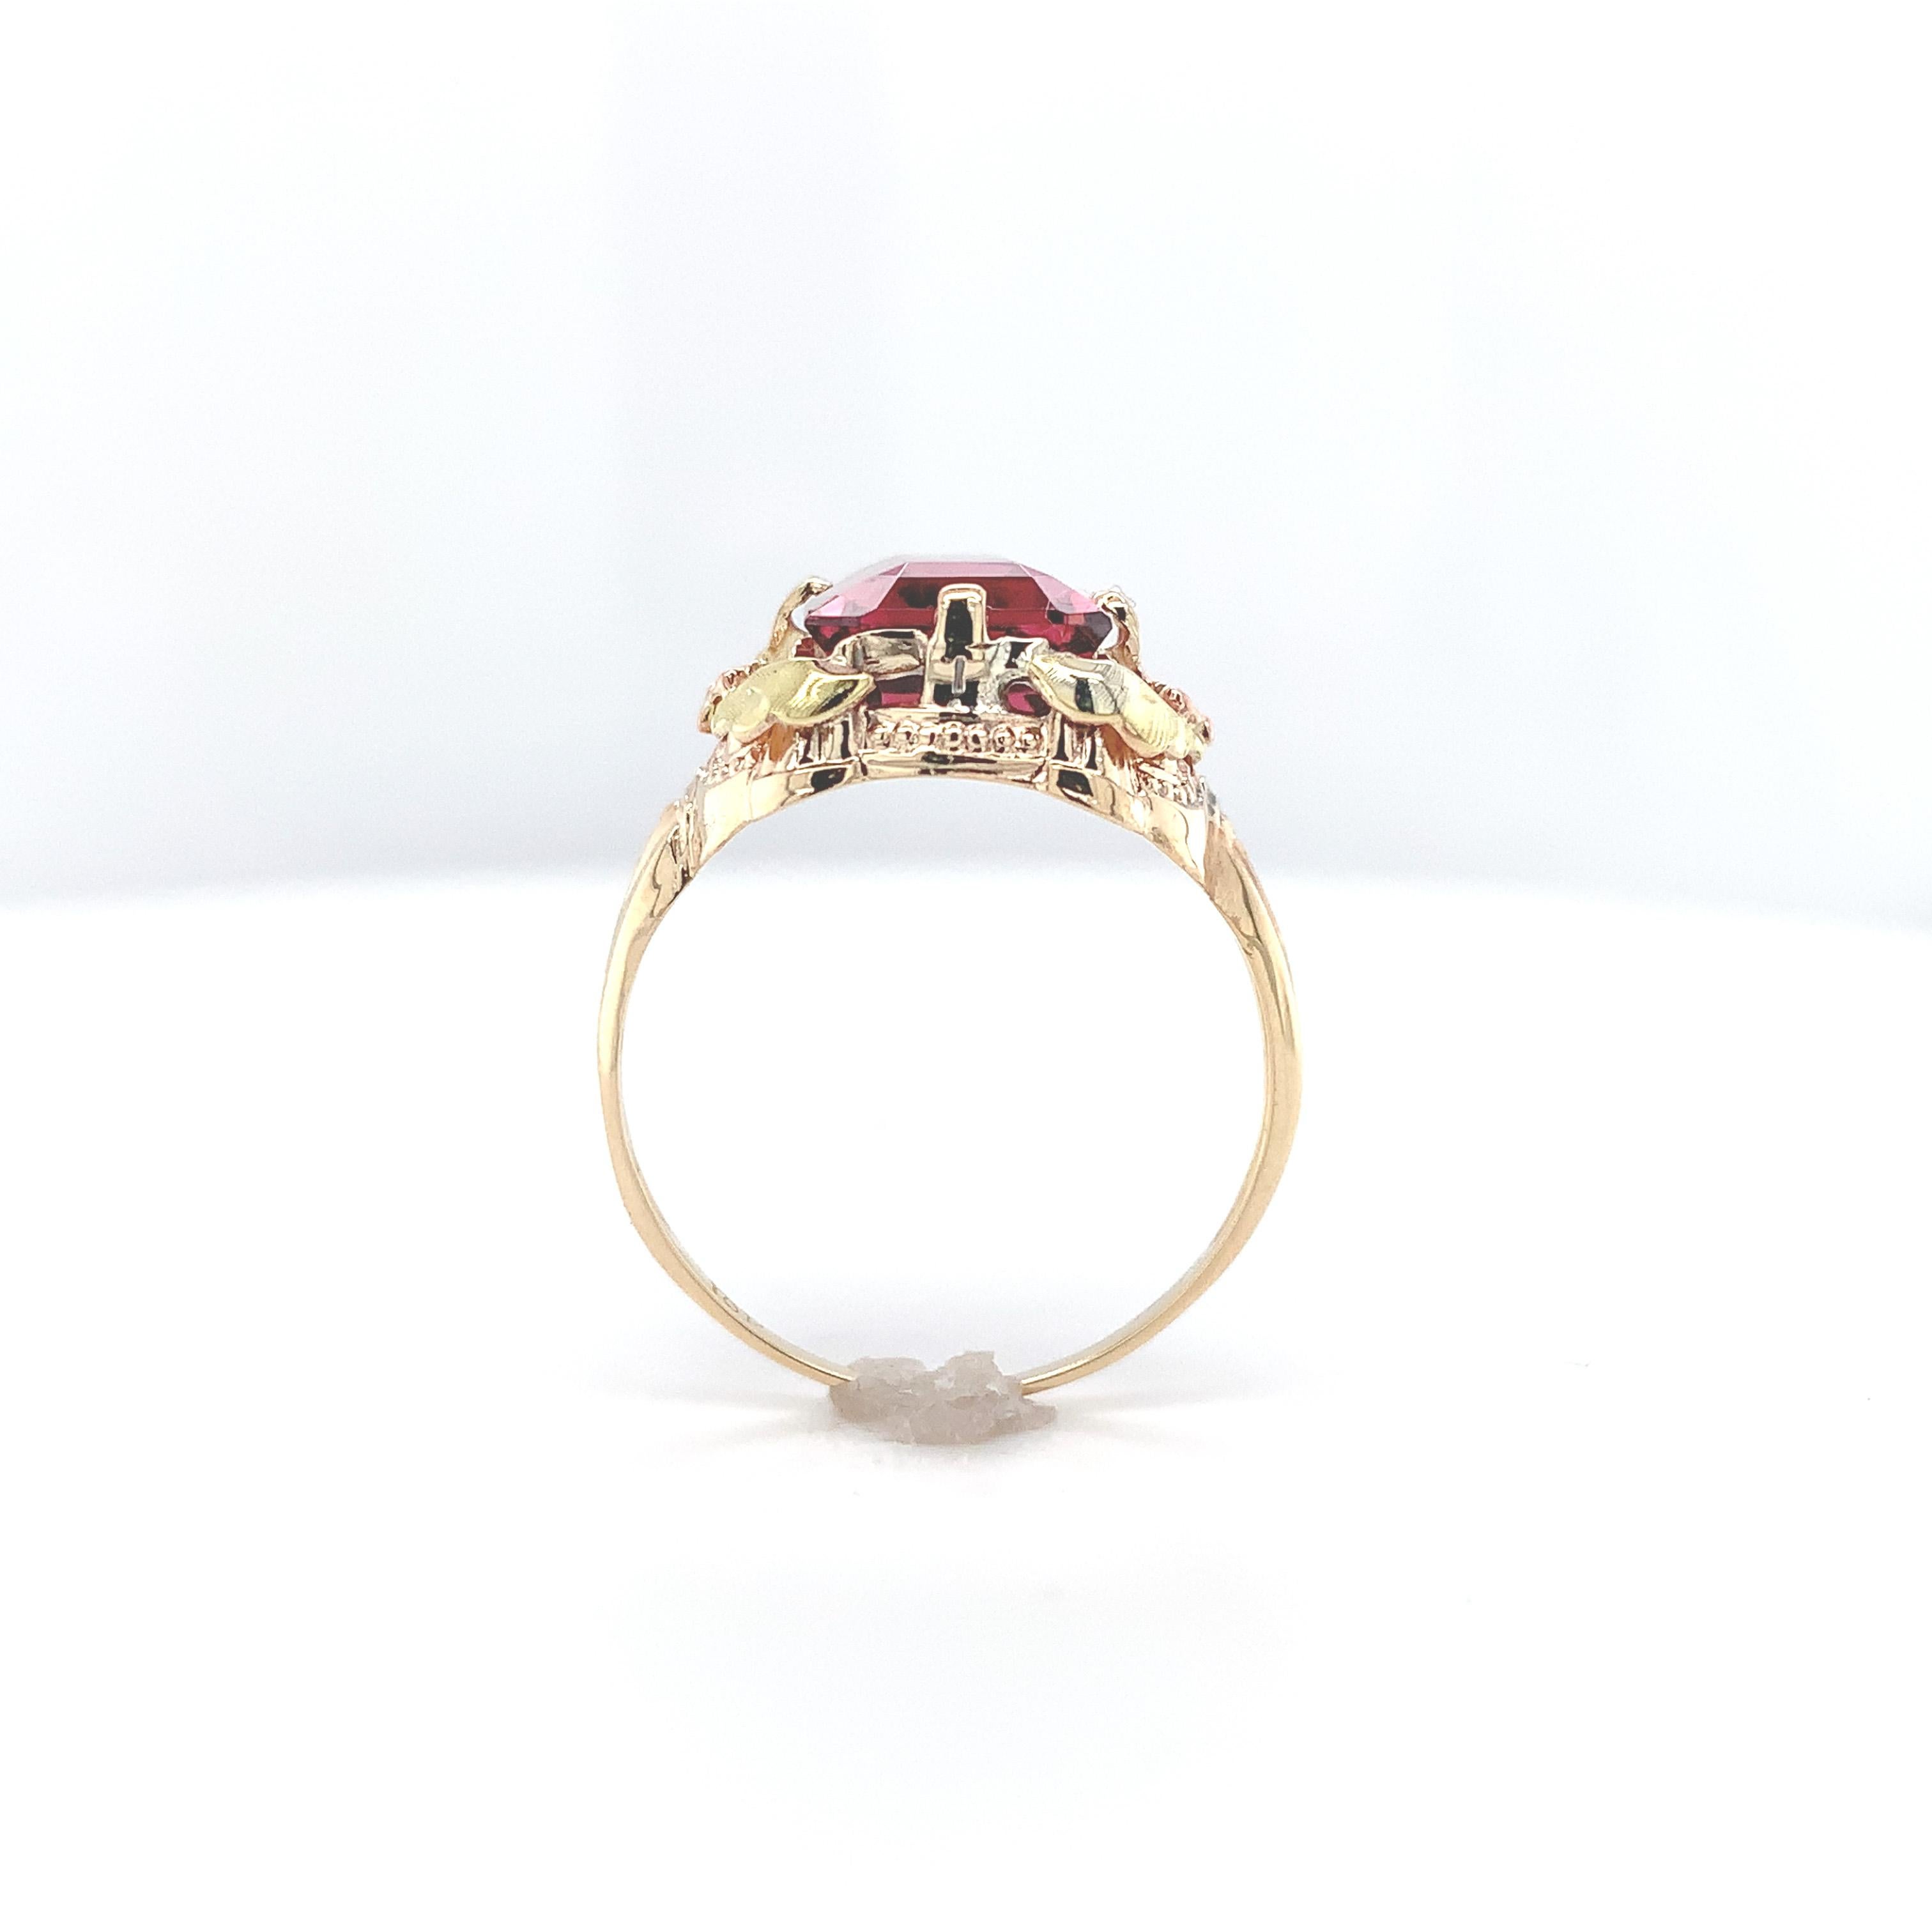 Vintage 10K gold filigree ring with applied rose gold flowers and green gold leaves featuring an emerald cut pink tourmaline. This beautiful orangy pink, pomegranate color tourmaline weighs 3.80 carats and measures about 10mm x 8mm. The ring fits a